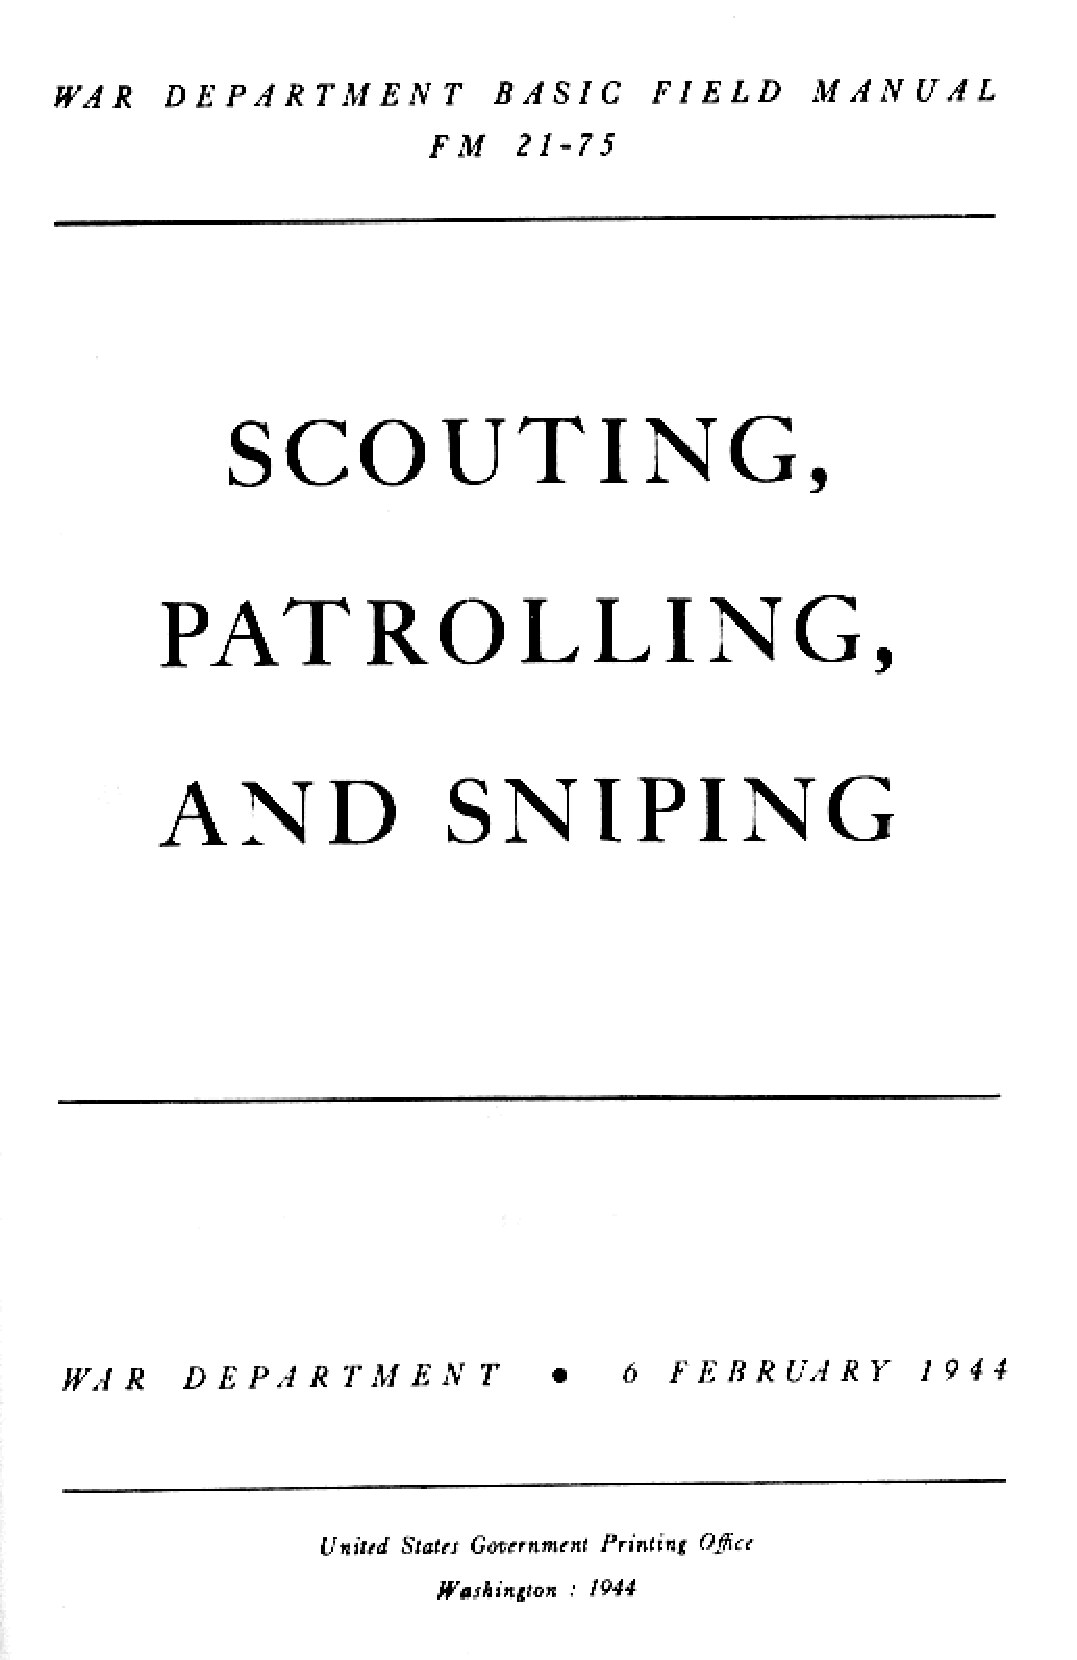 FM 21-75 Scouting, Patrolling, and Sniping 1944